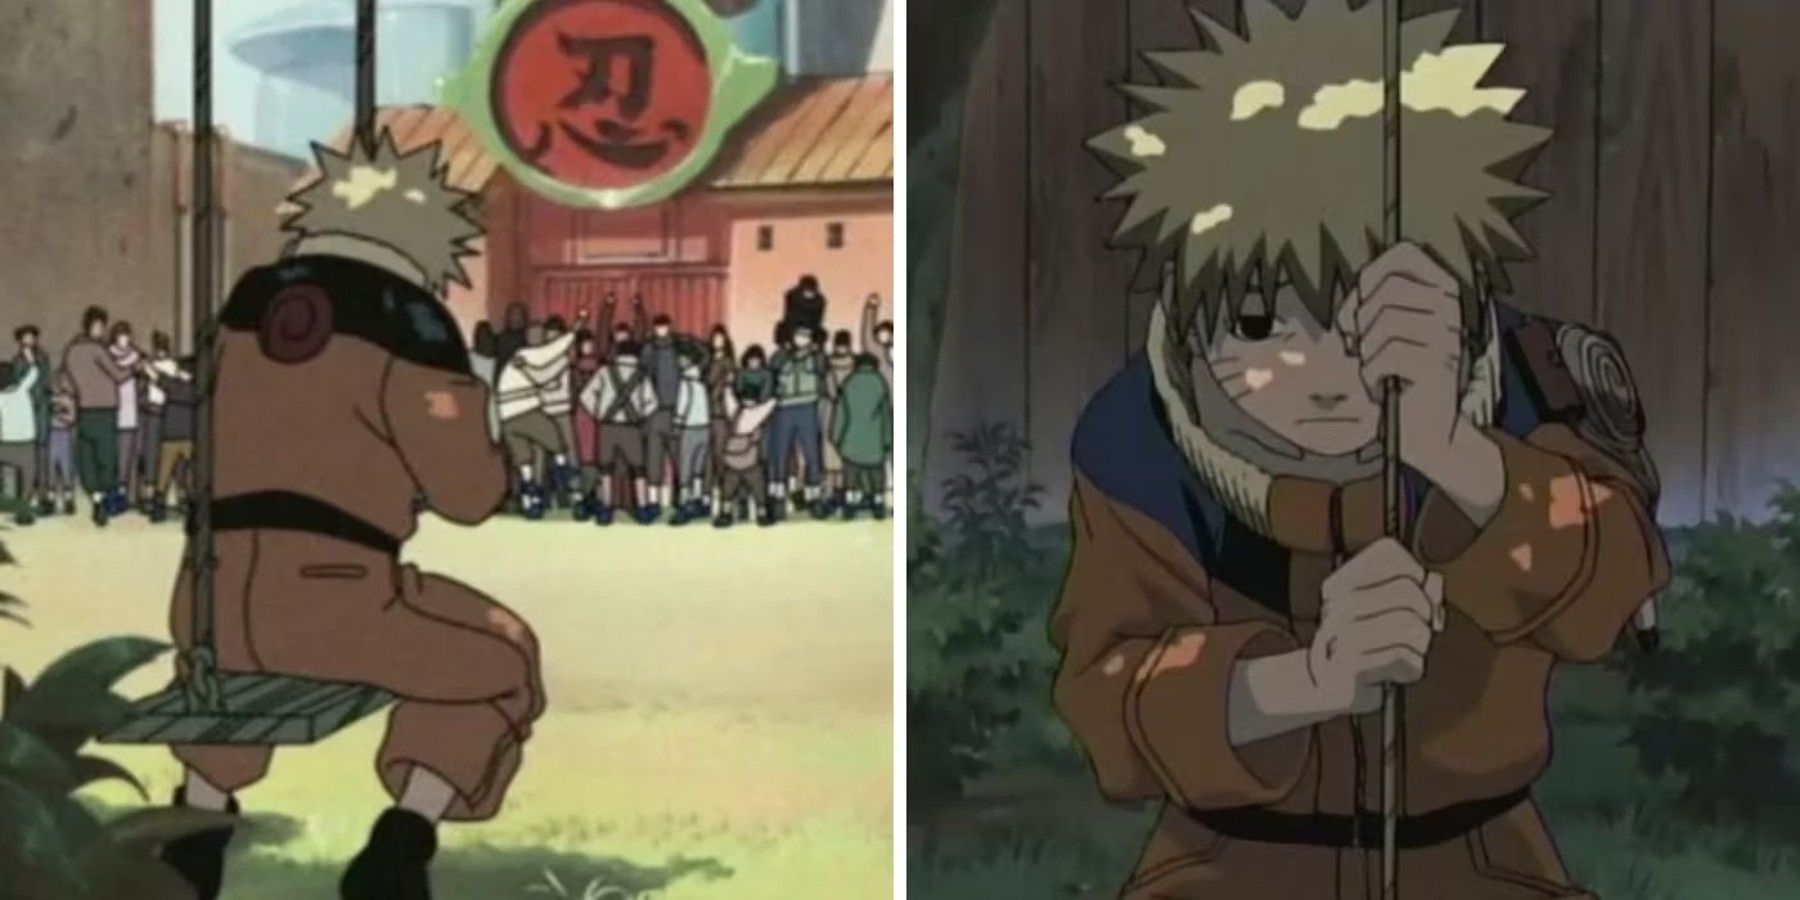 The Third Hokage was a TERRIBLE person. Here's why #naruto #narutos